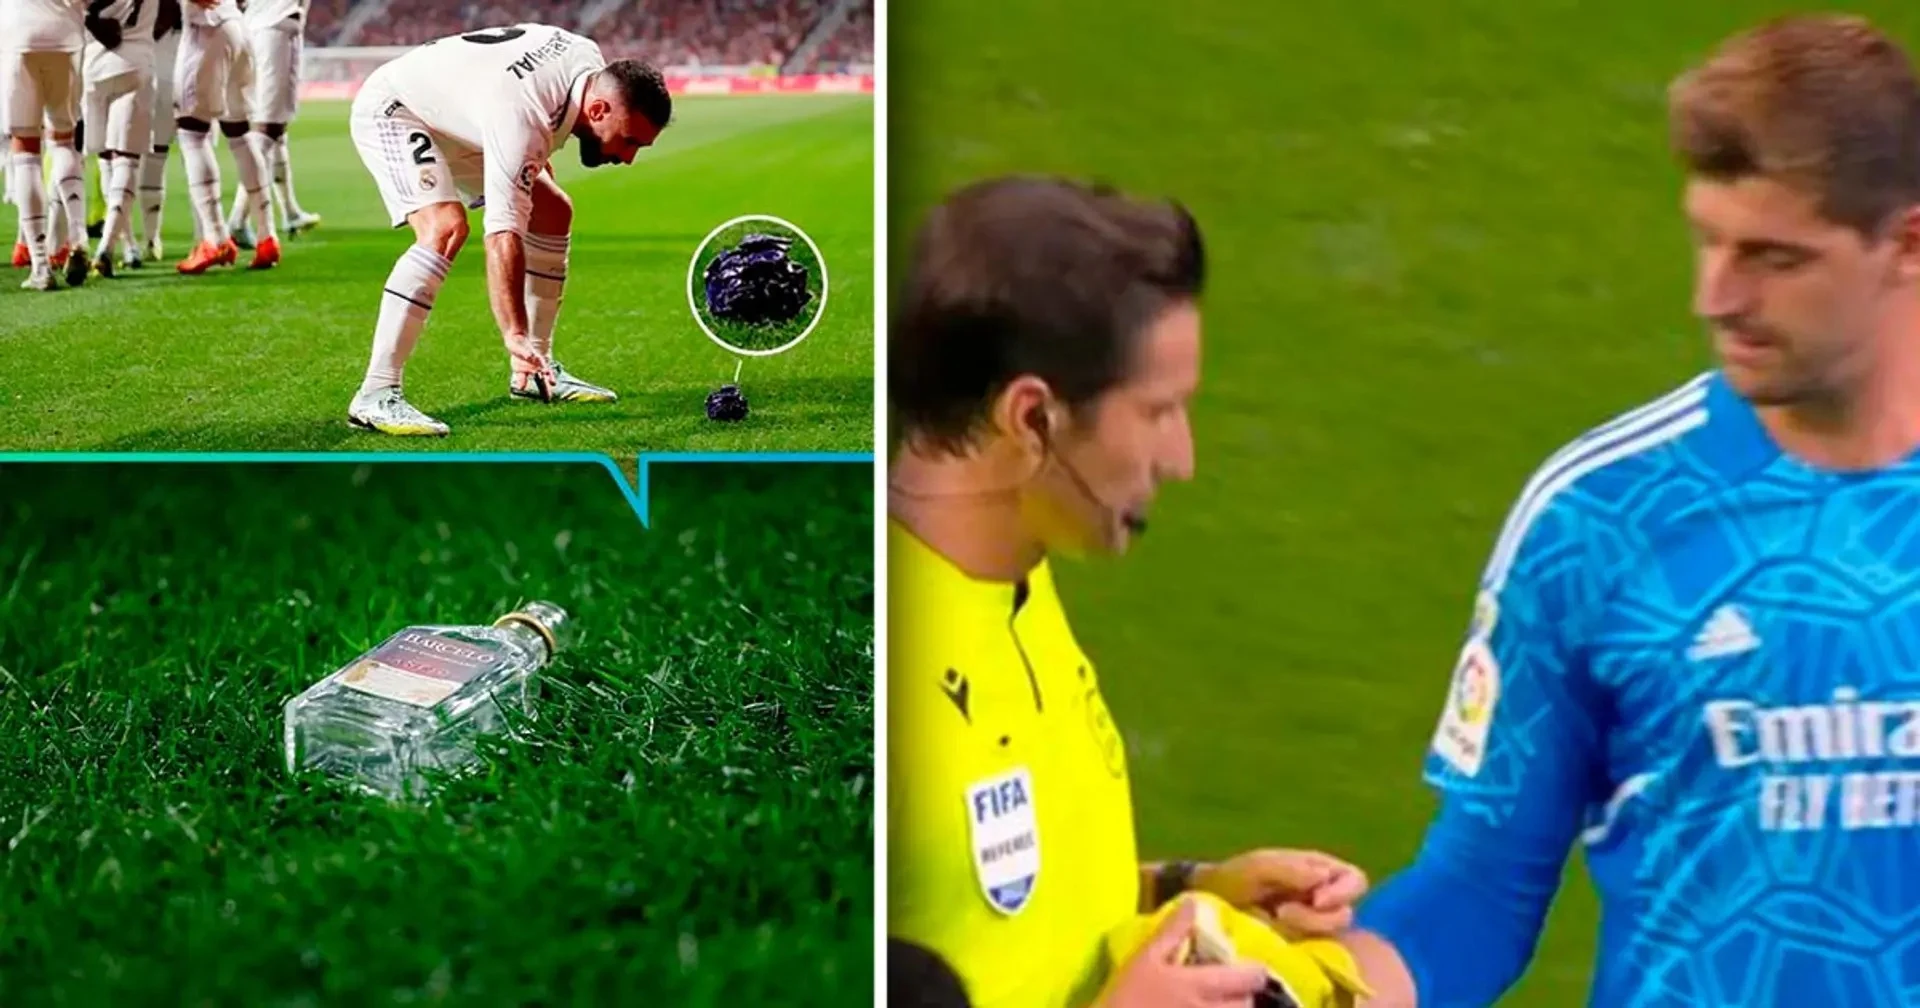 Atletico fans threw glass bottles at Real Madrid players during the game